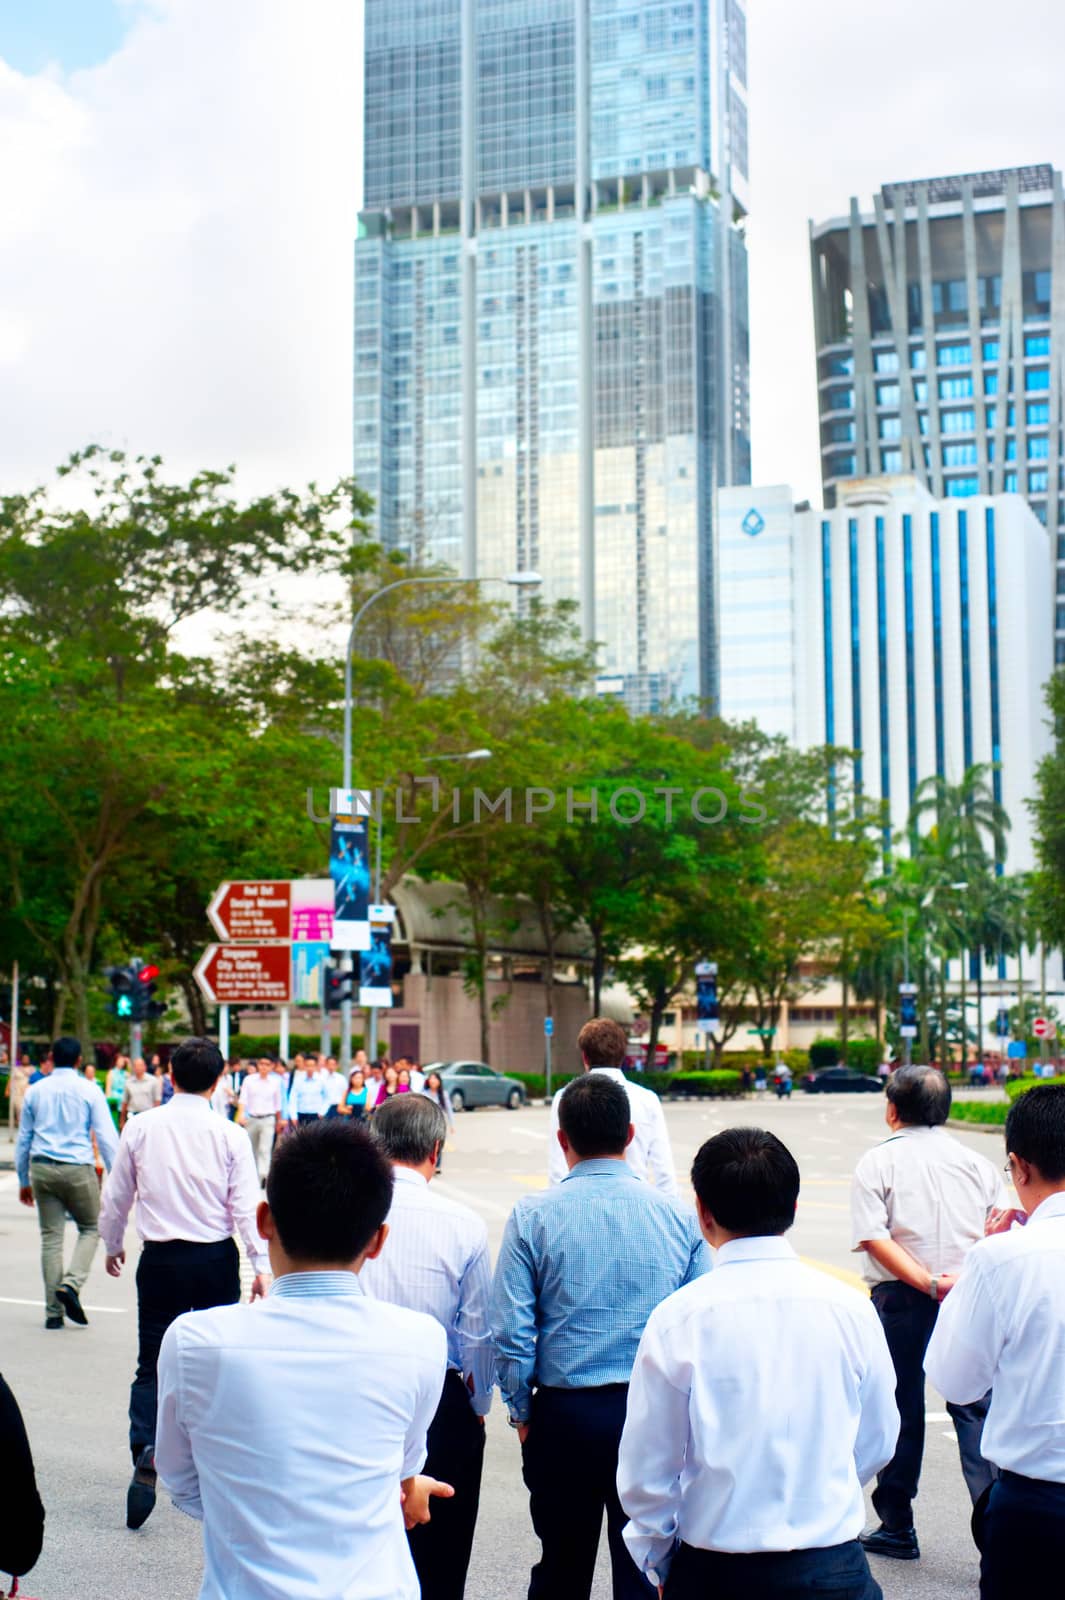 Singapore, Republic of Singapore - March 07, 2013: Unidentified businessmen crossing the street in Singapore. There are more than 7,000 multinational corporations from United States, Japan and Europe in Singapore.